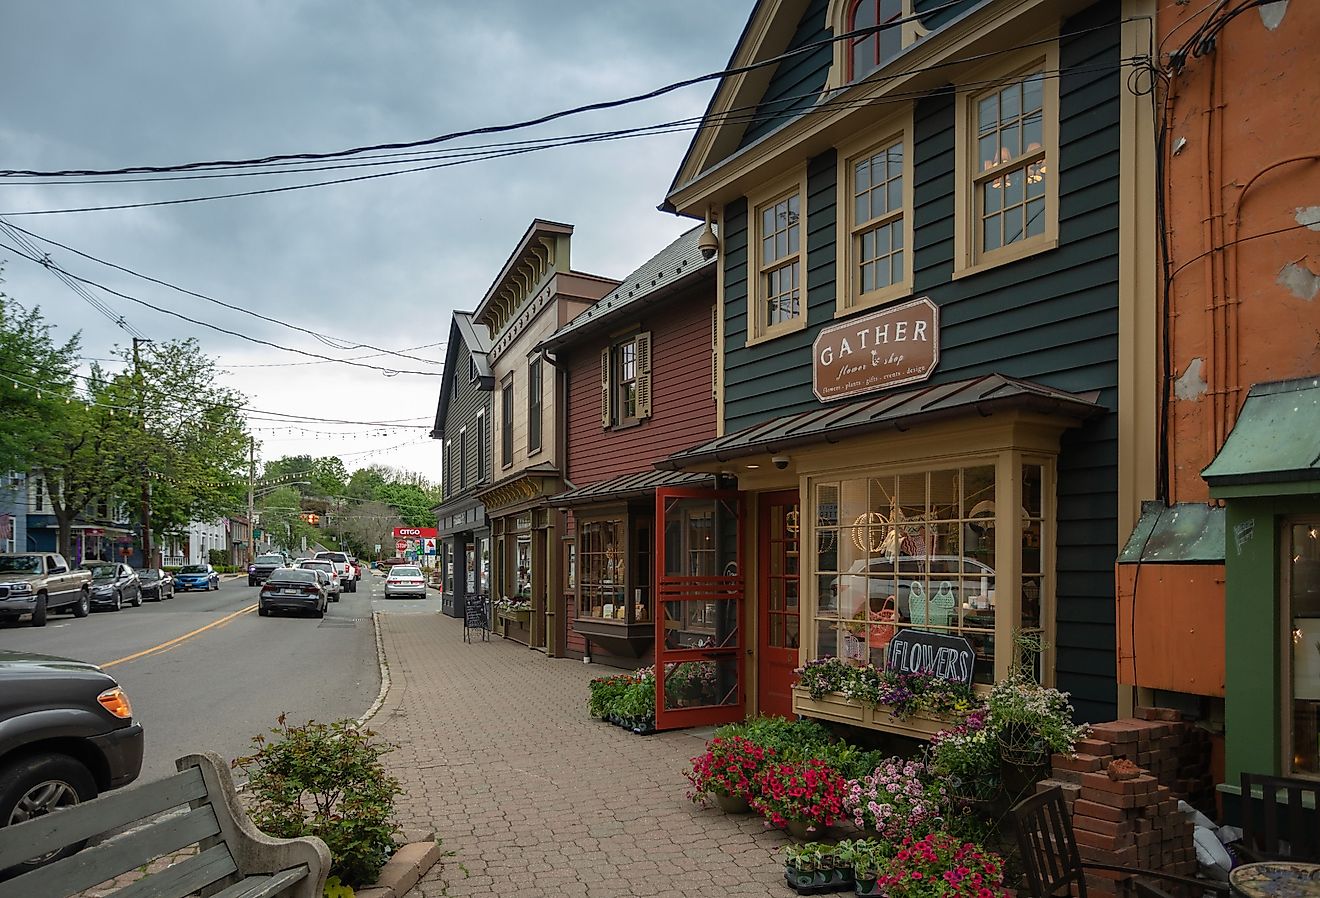 The City Center in Frenchtown, New Jersey. Image credit christianthiel.net via Shutterstock.com